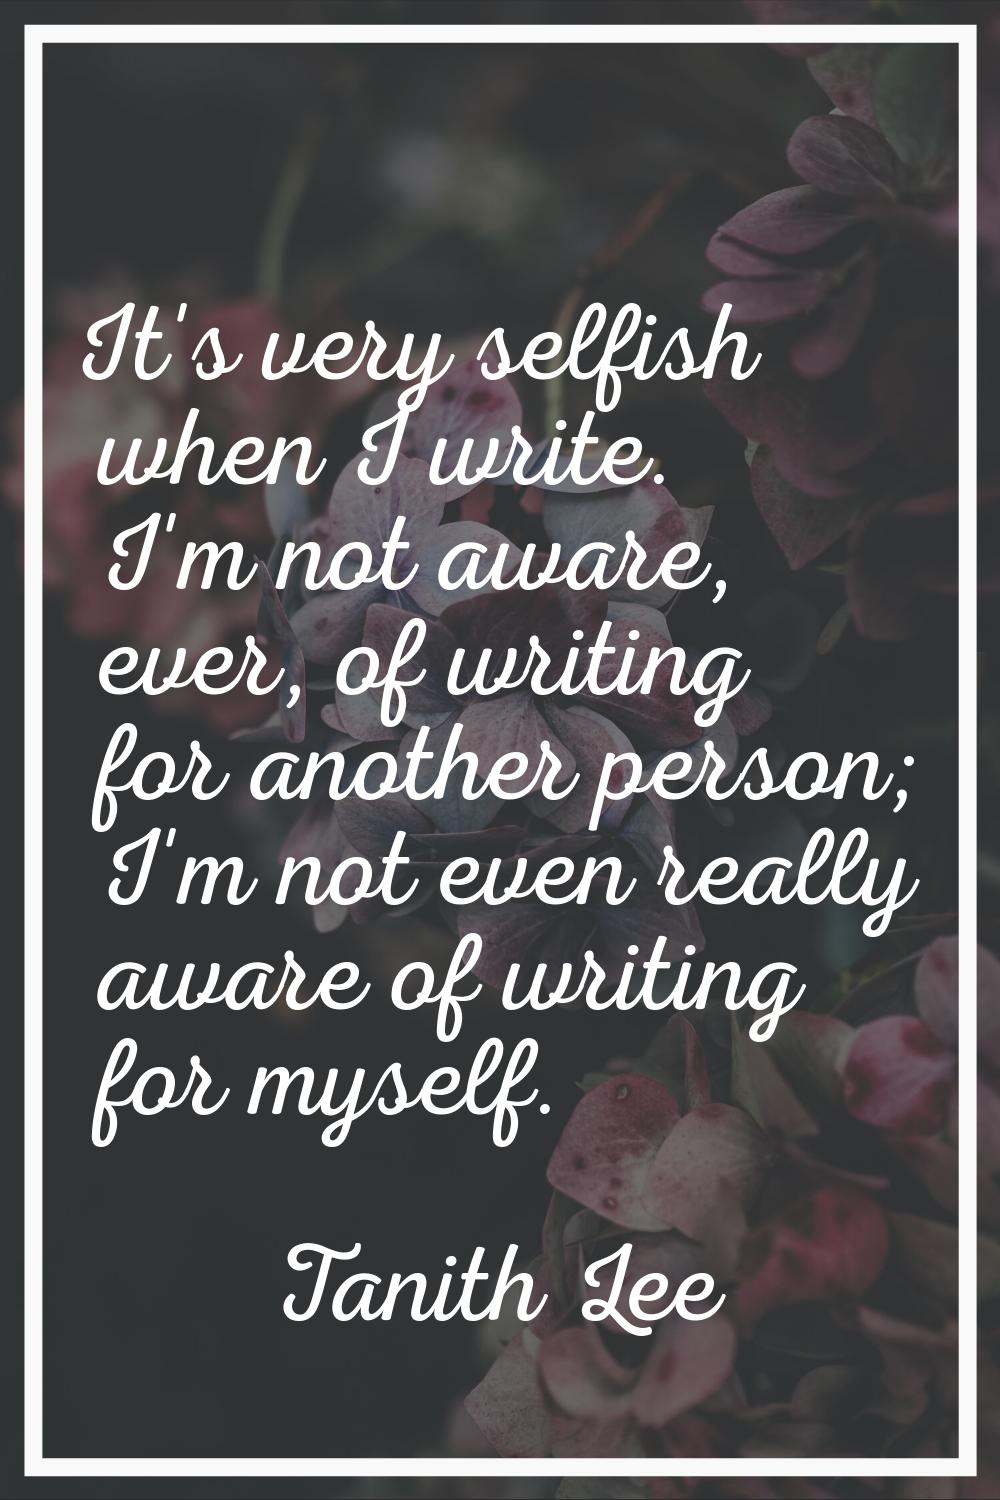 It's very selfish when I write. I'm not aware, ever, of writing for another person; I'm not even re